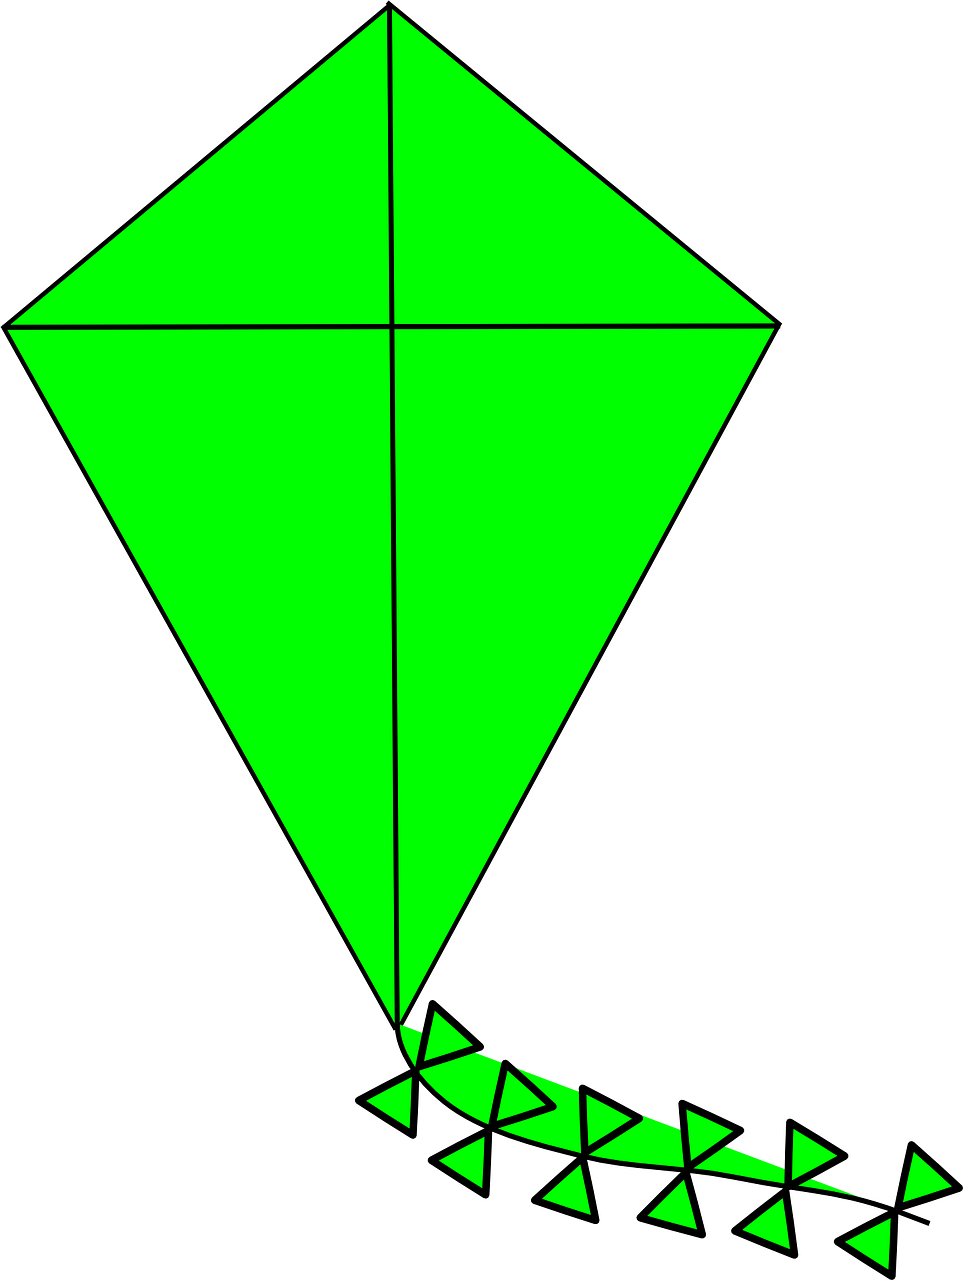 A Green Kite With Black Background